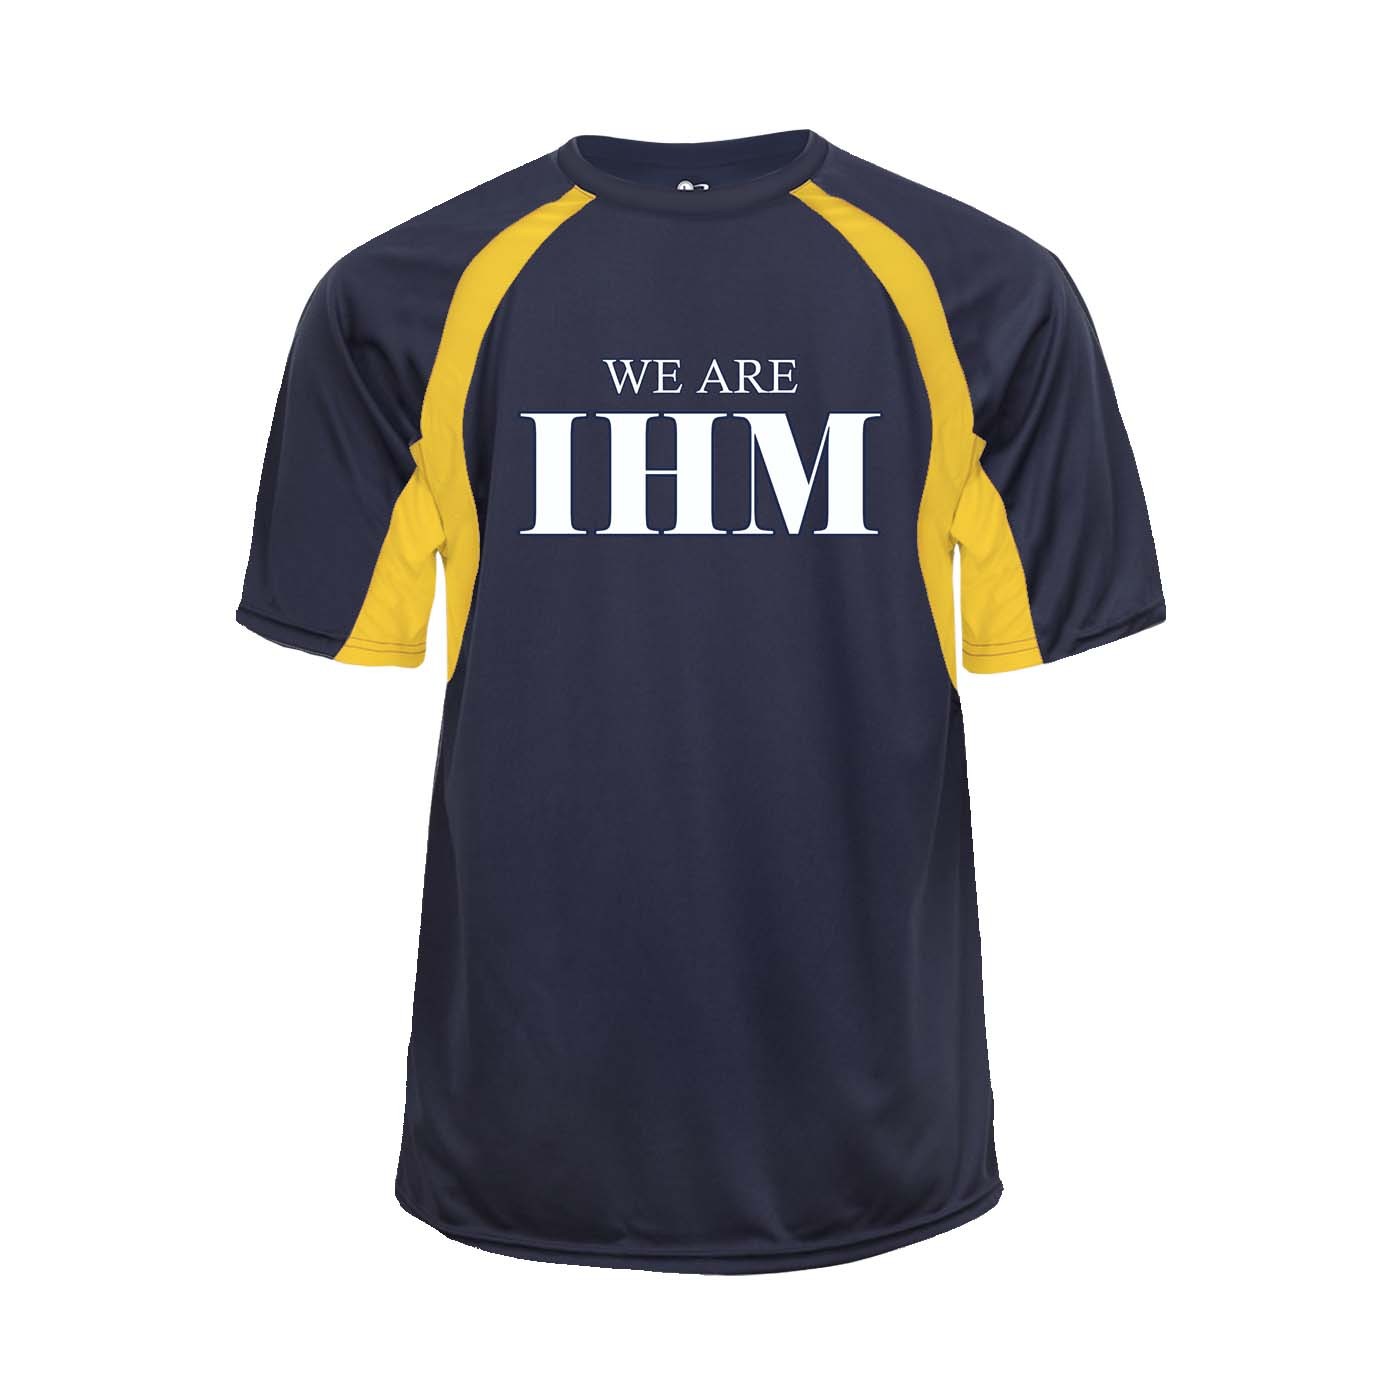 IHM Spirit Hook S/S T-Shirt w/ We Are IHM Logo - Please Allow 2-3 Weeks for Delivery